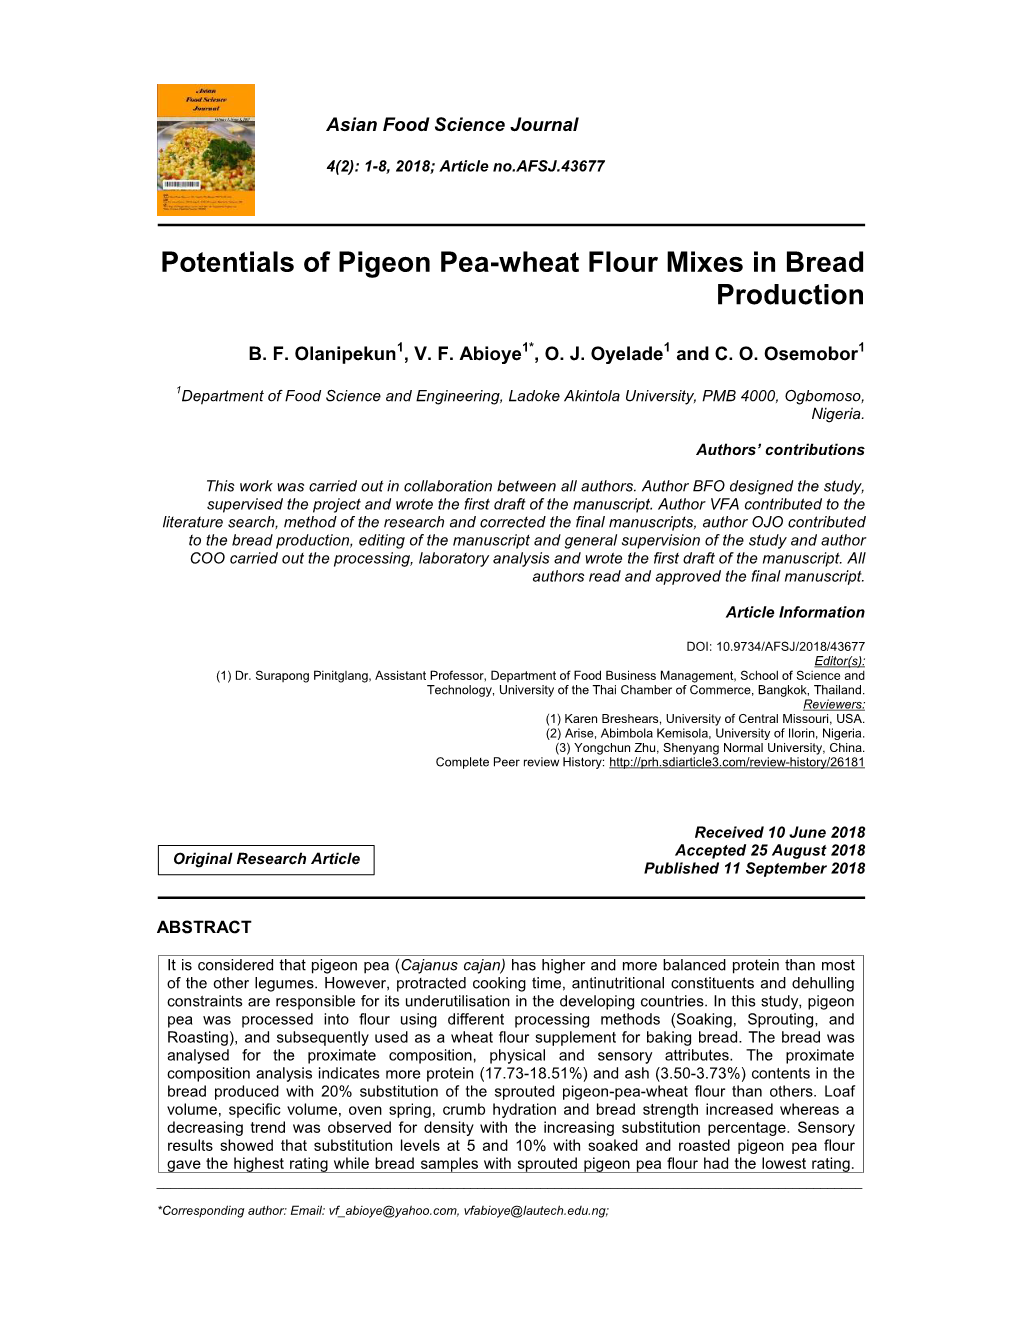 Potentials of Pigeon Pea-Wheat Flour Mixes in Bread Production